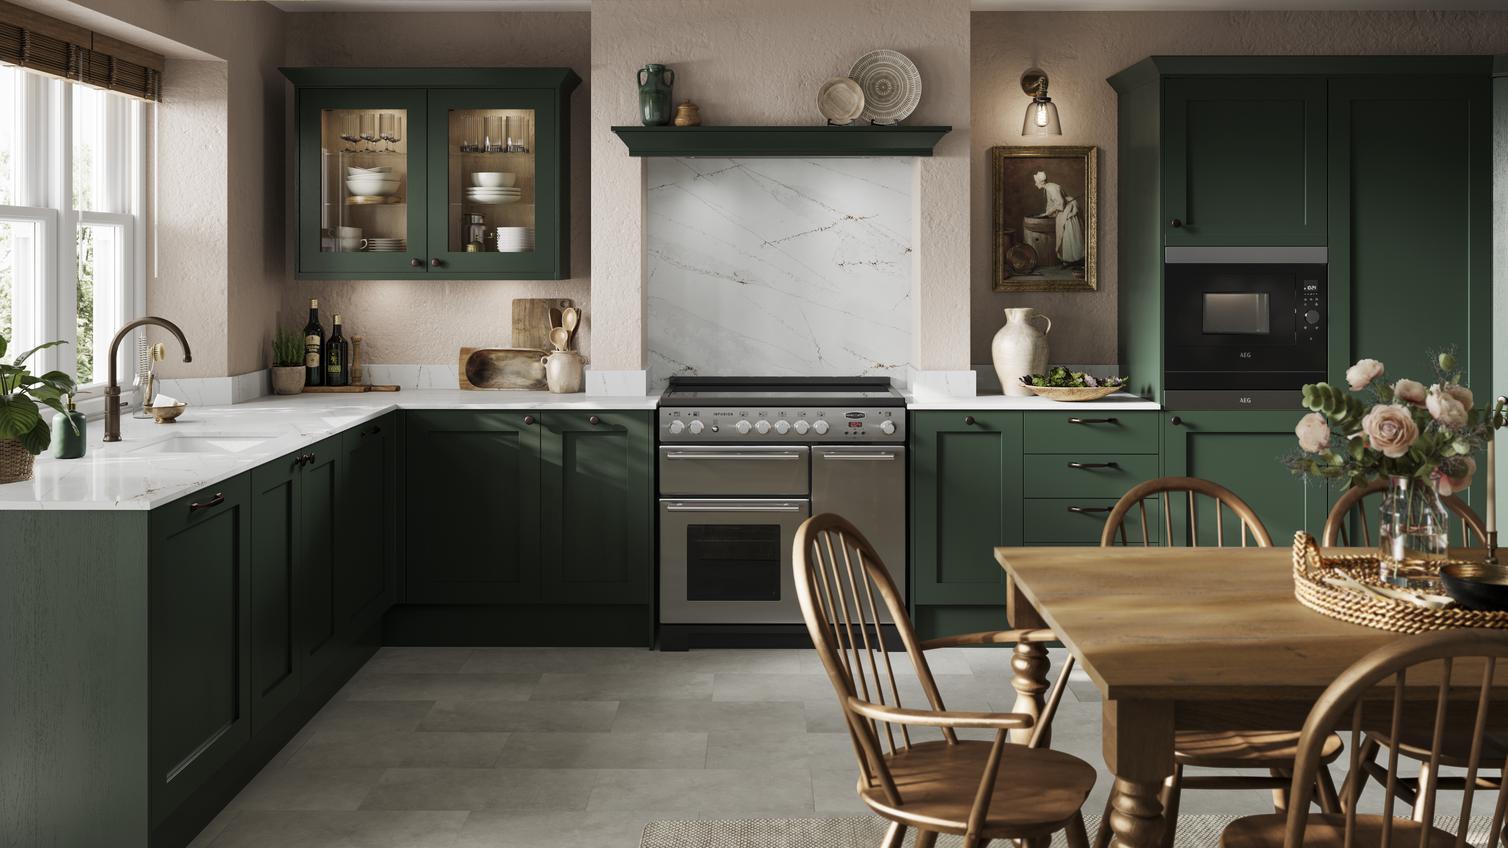 A dark, fir green shaker kitchen in an L-shaped layout. It has glass wall cabinets, tile flooring, and a Range cooker.